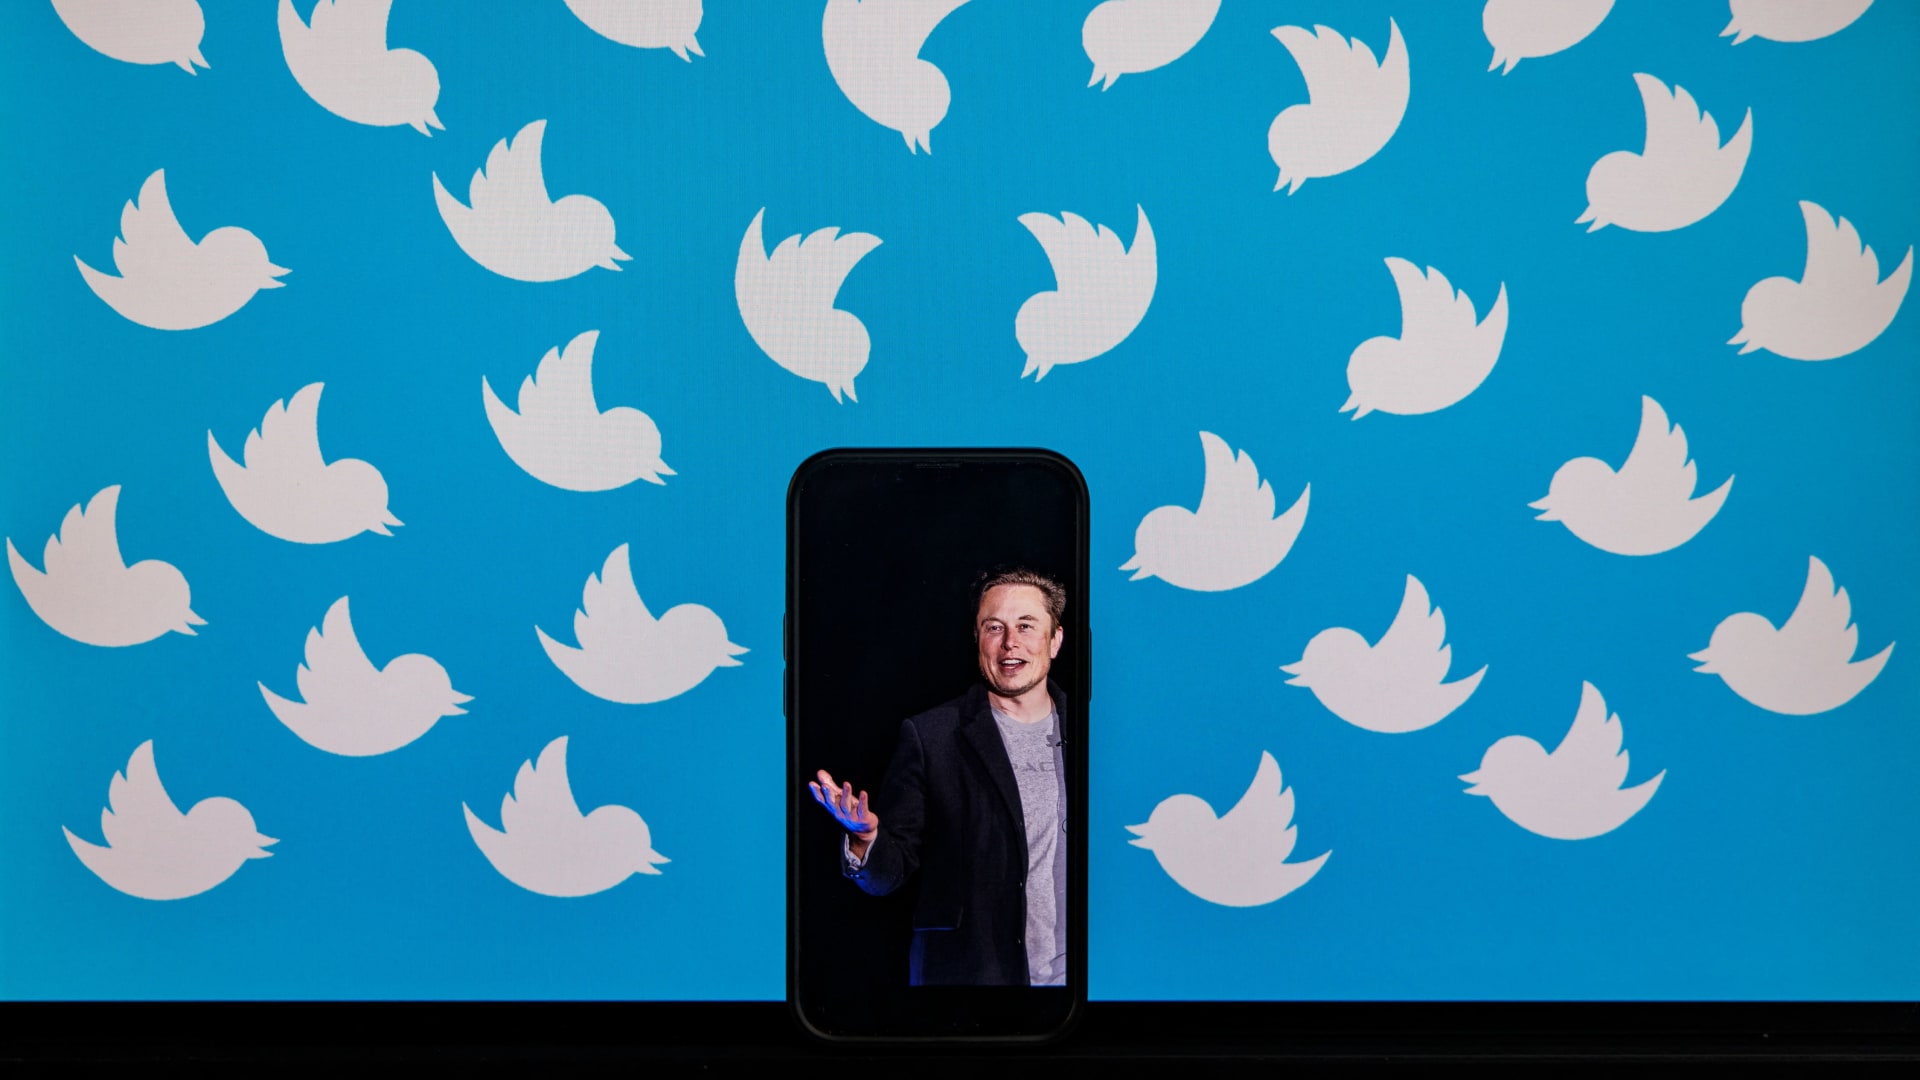 Elon Musk’s plans for Twitter may take inspiration from Chinese super apps